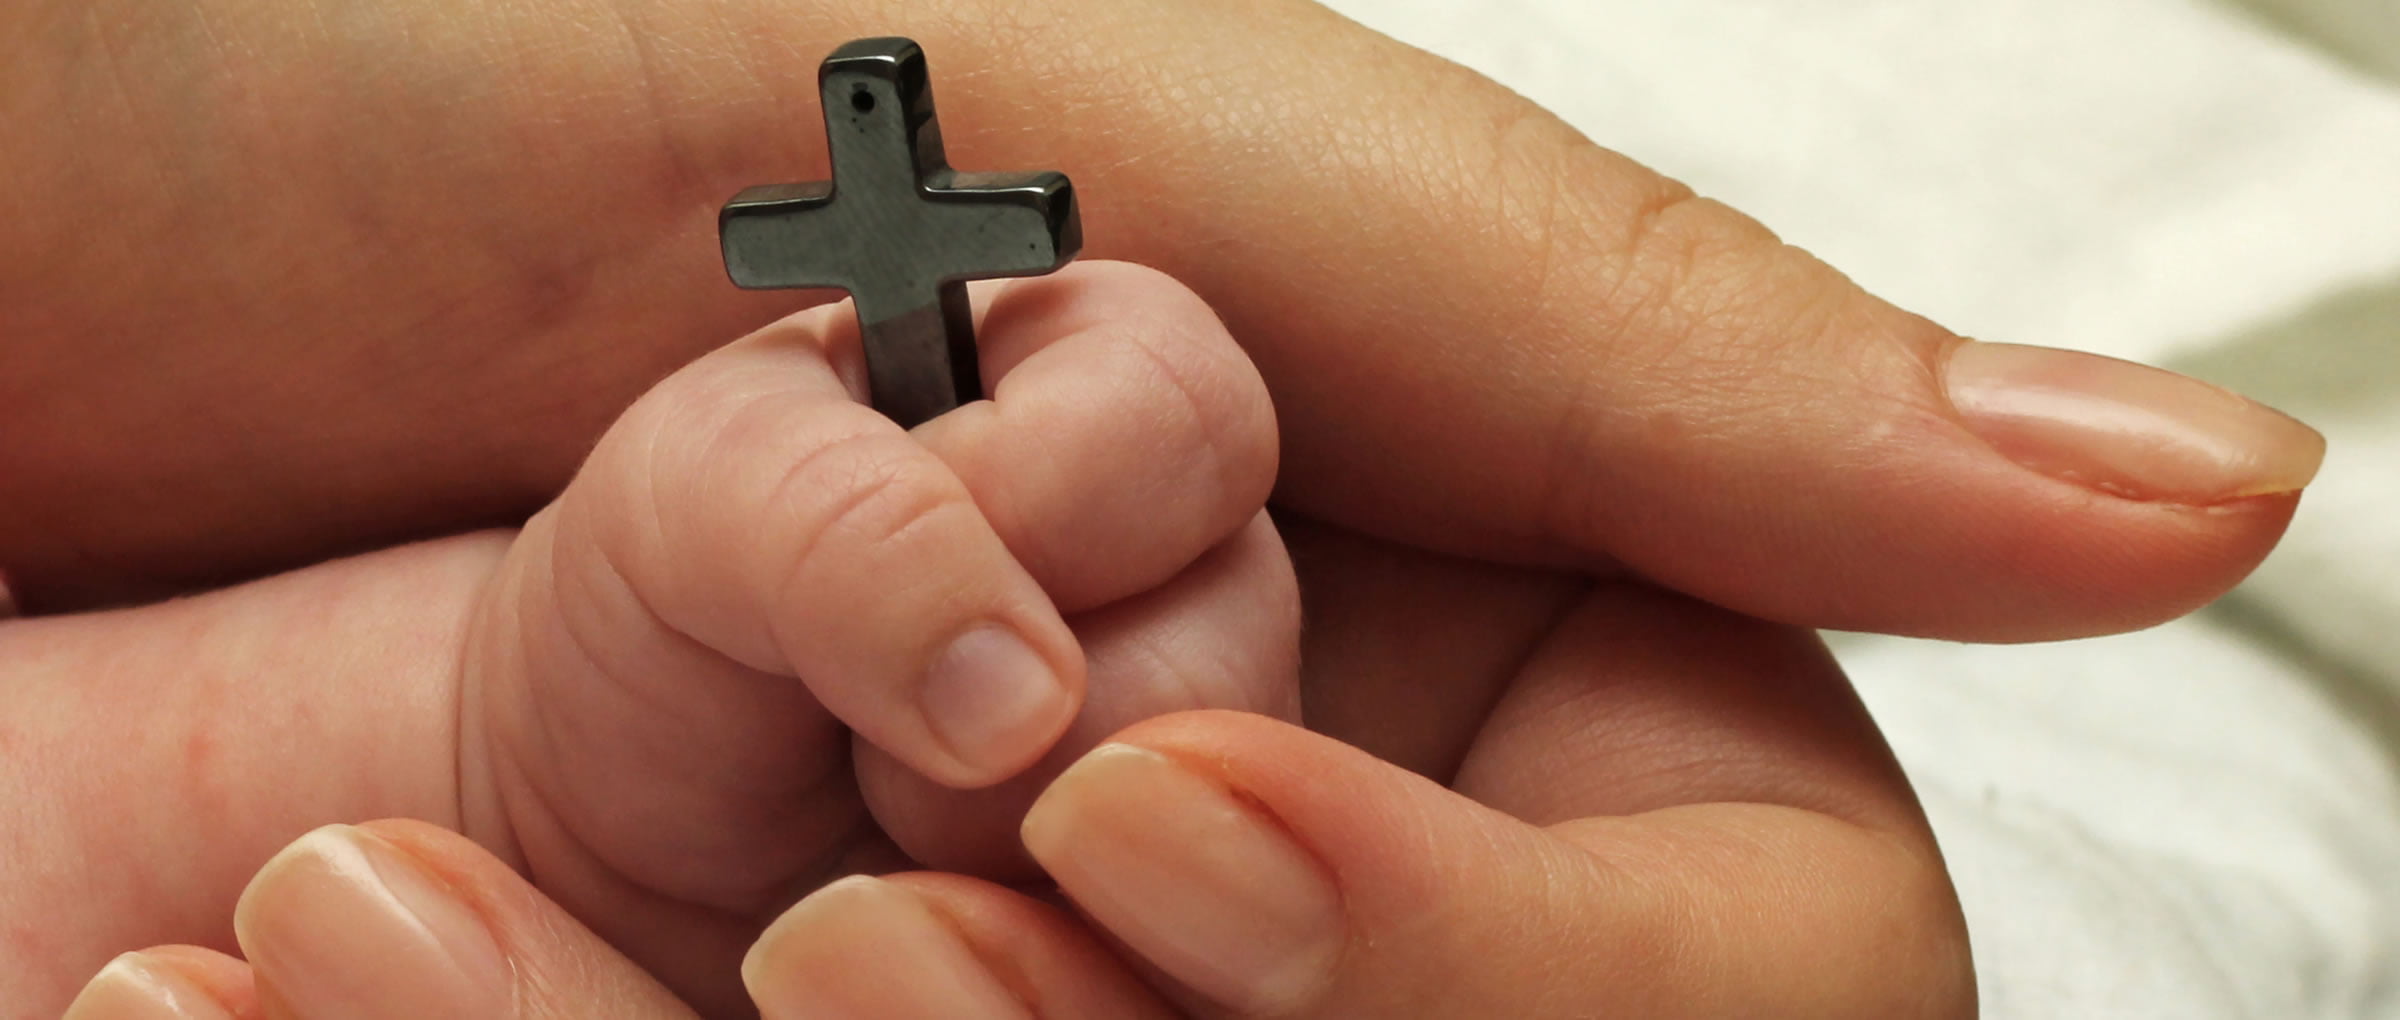 The creation of new life from a Catholic point of view